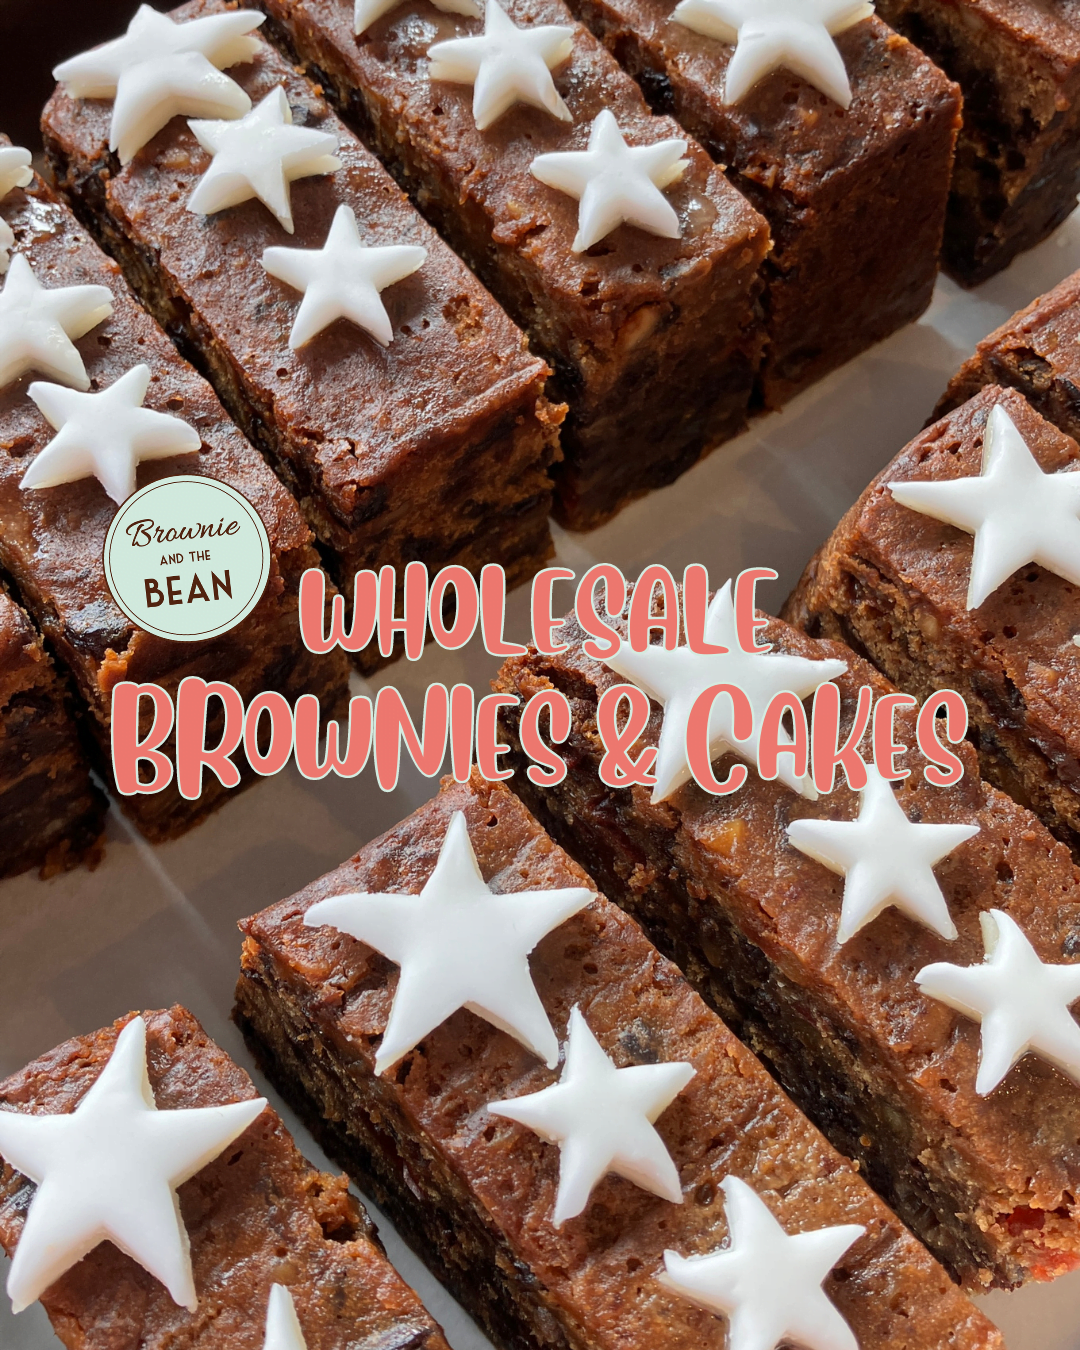 Wholesale cakes are lined up diagonal across the photo. The cakes have starred icing toppings and the text reads "Wholesale Brownies & Cakes". The Brownie and the Bean logo is to the left of the text. The cakes are brown fruit cakes with raisins.